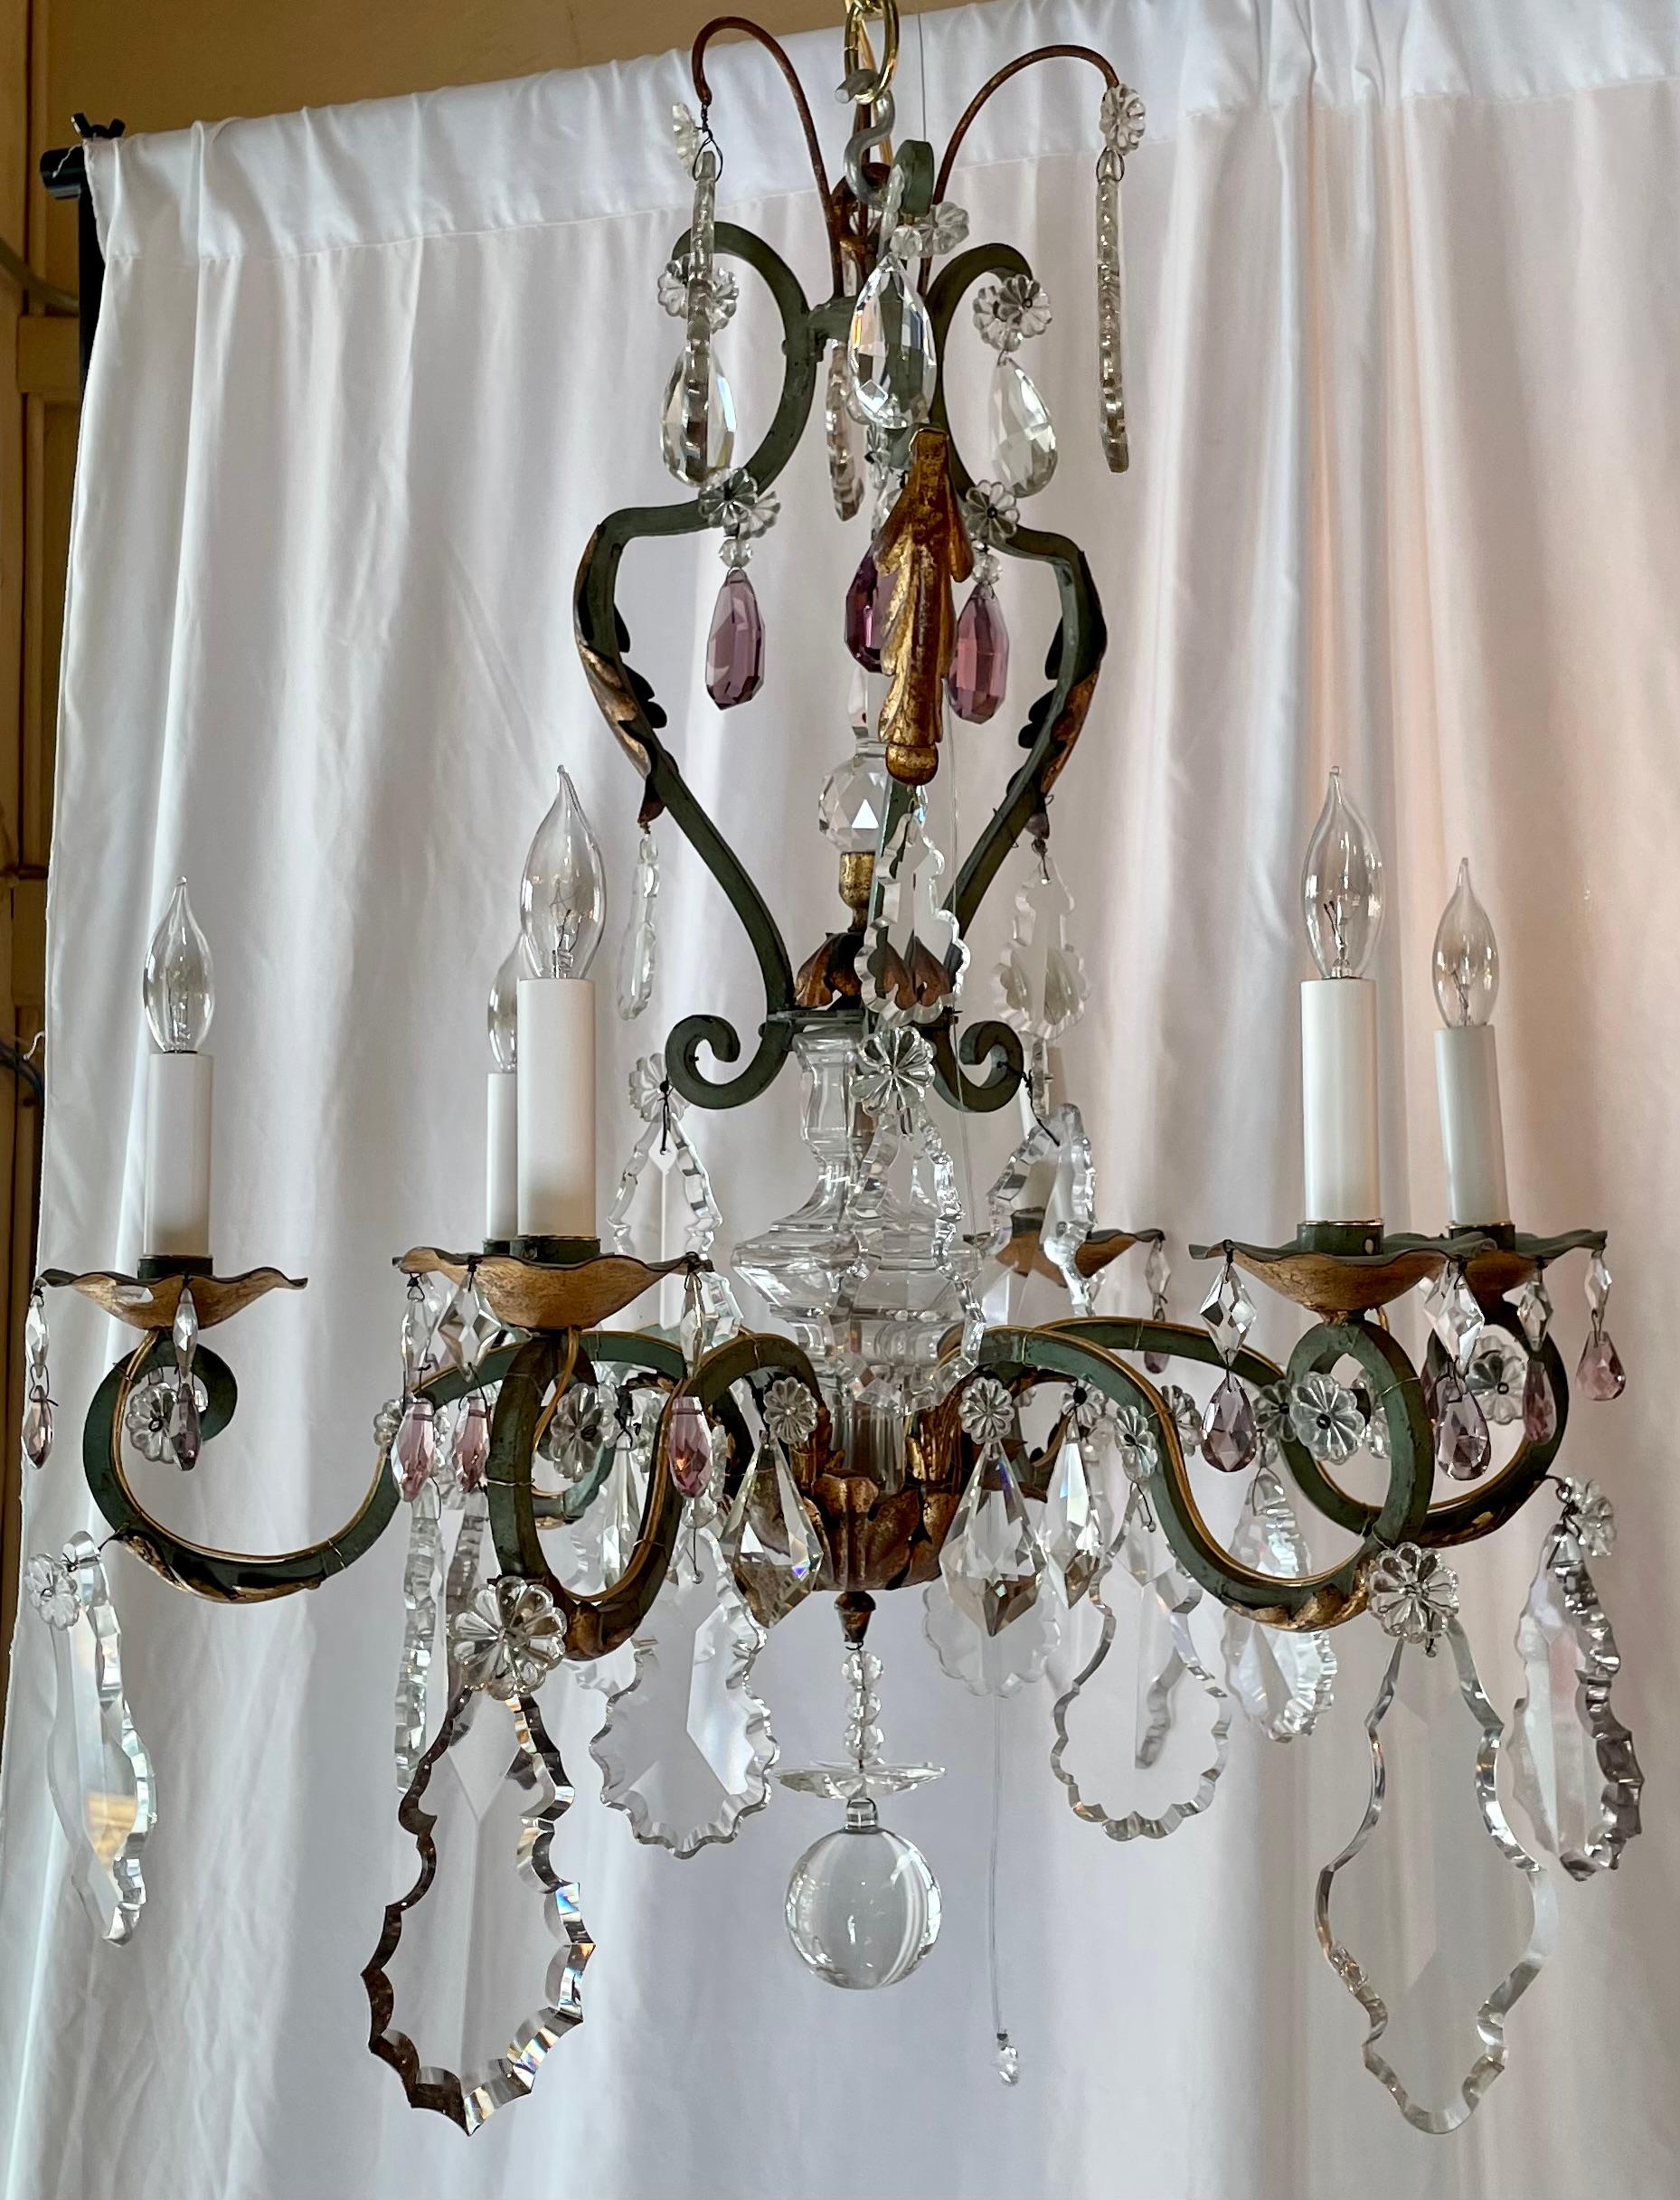 Estate French Wrought Iron and Clear & Multi-Colored Cut Crystal Chandelier, Circa 1920's.
Patinated and Antique Gold Iron Frame with Amethyst, Amber and Clear Prisms. 